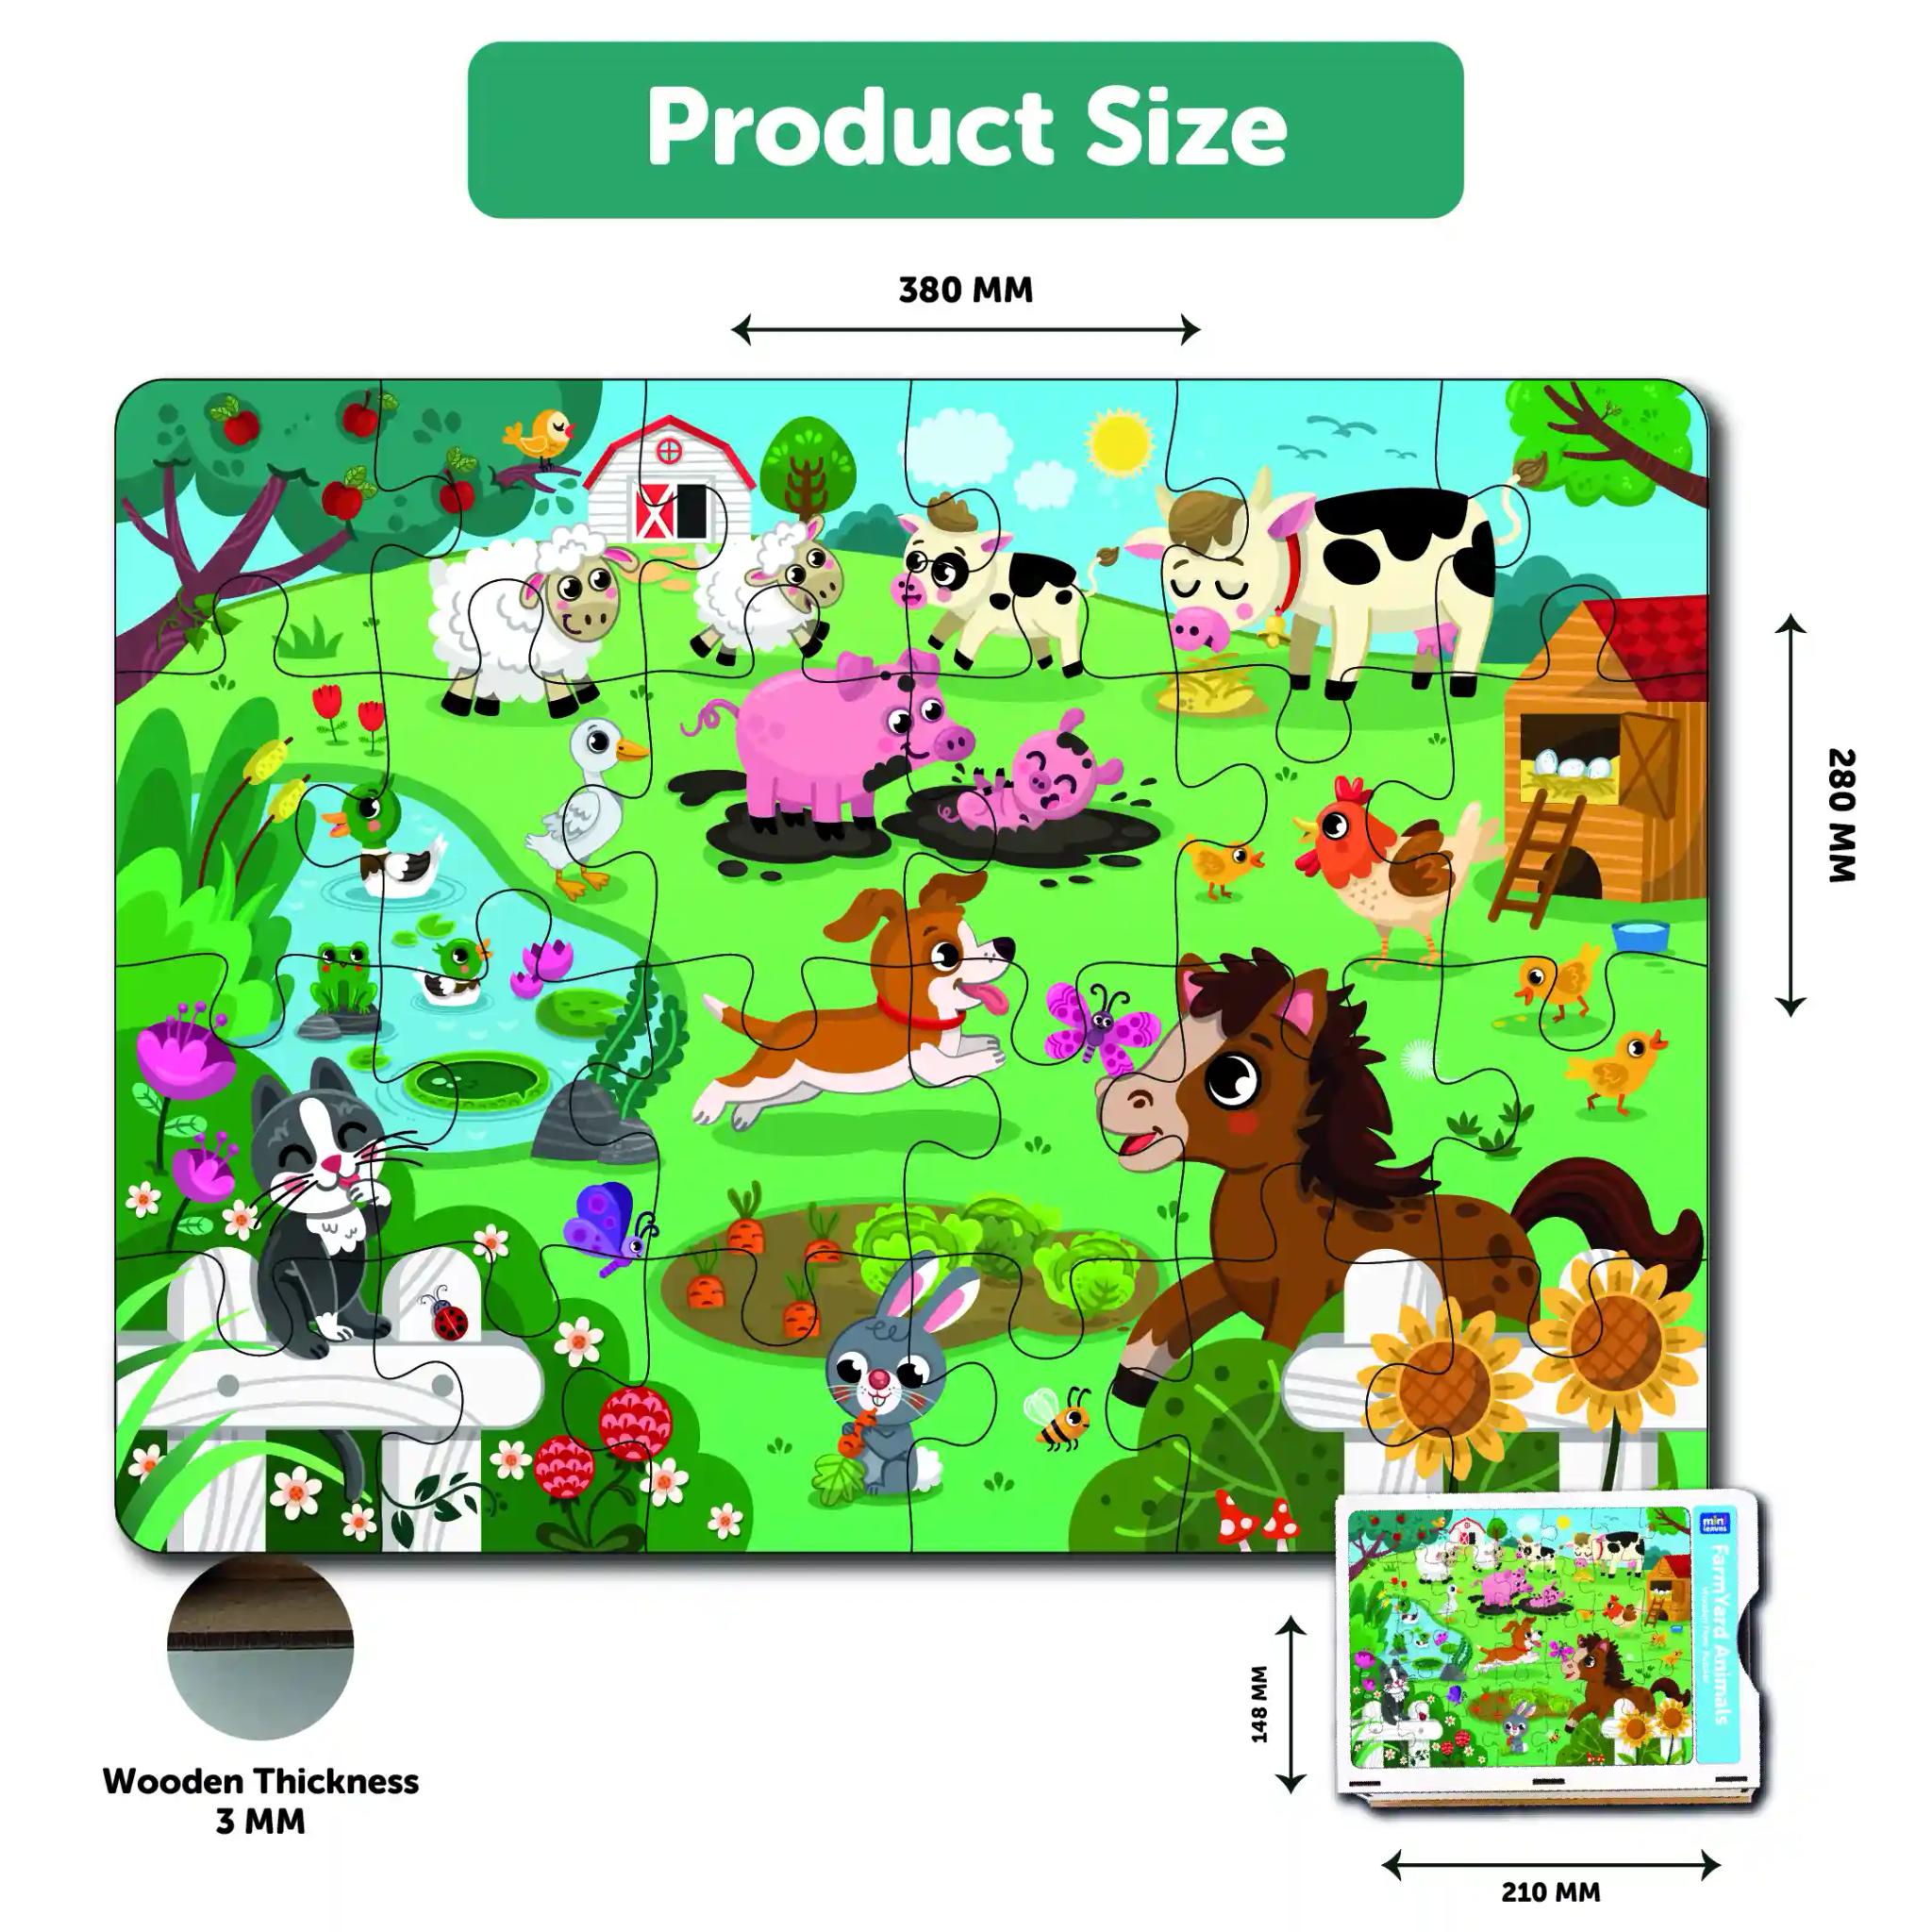 Mini Leaves Farm Animal Premium Wooden Floor Puzzle for Kids 24 Pieces with Wooden Box